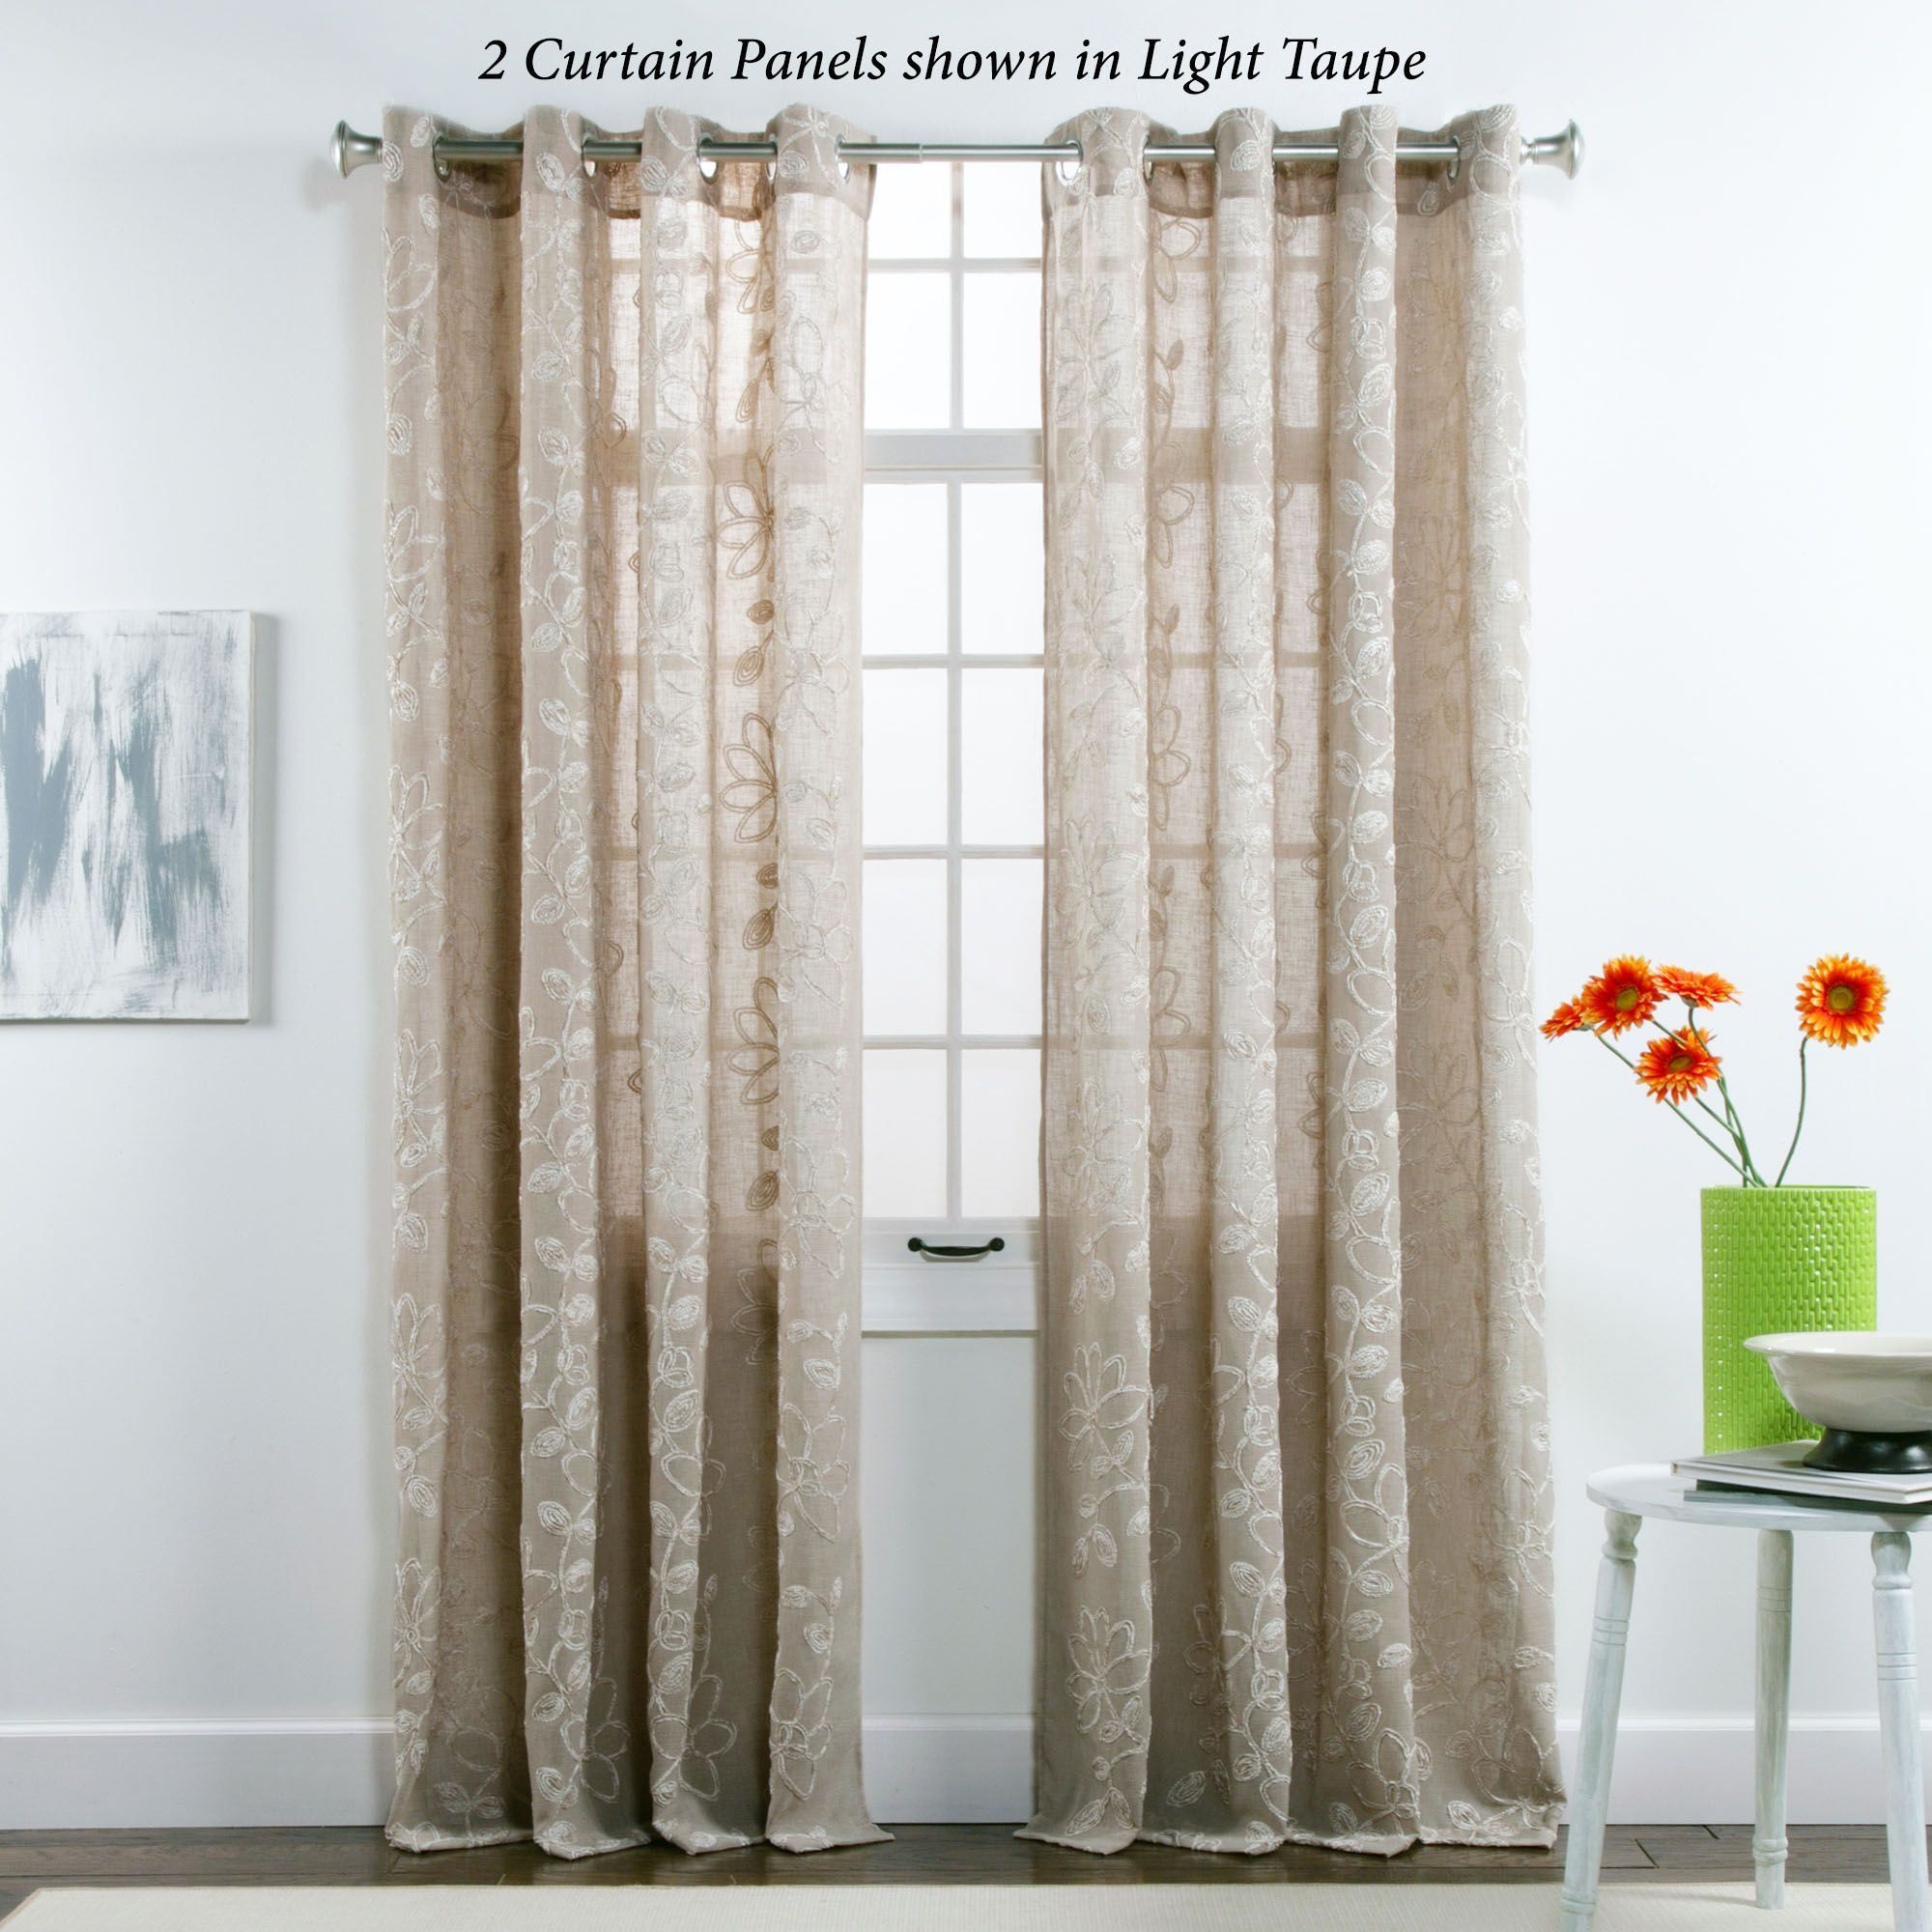 Sheer Curtains Window Treatments Touch Of Class Intended For Sheer Grommet Curtain Panels (View 3 of 25)